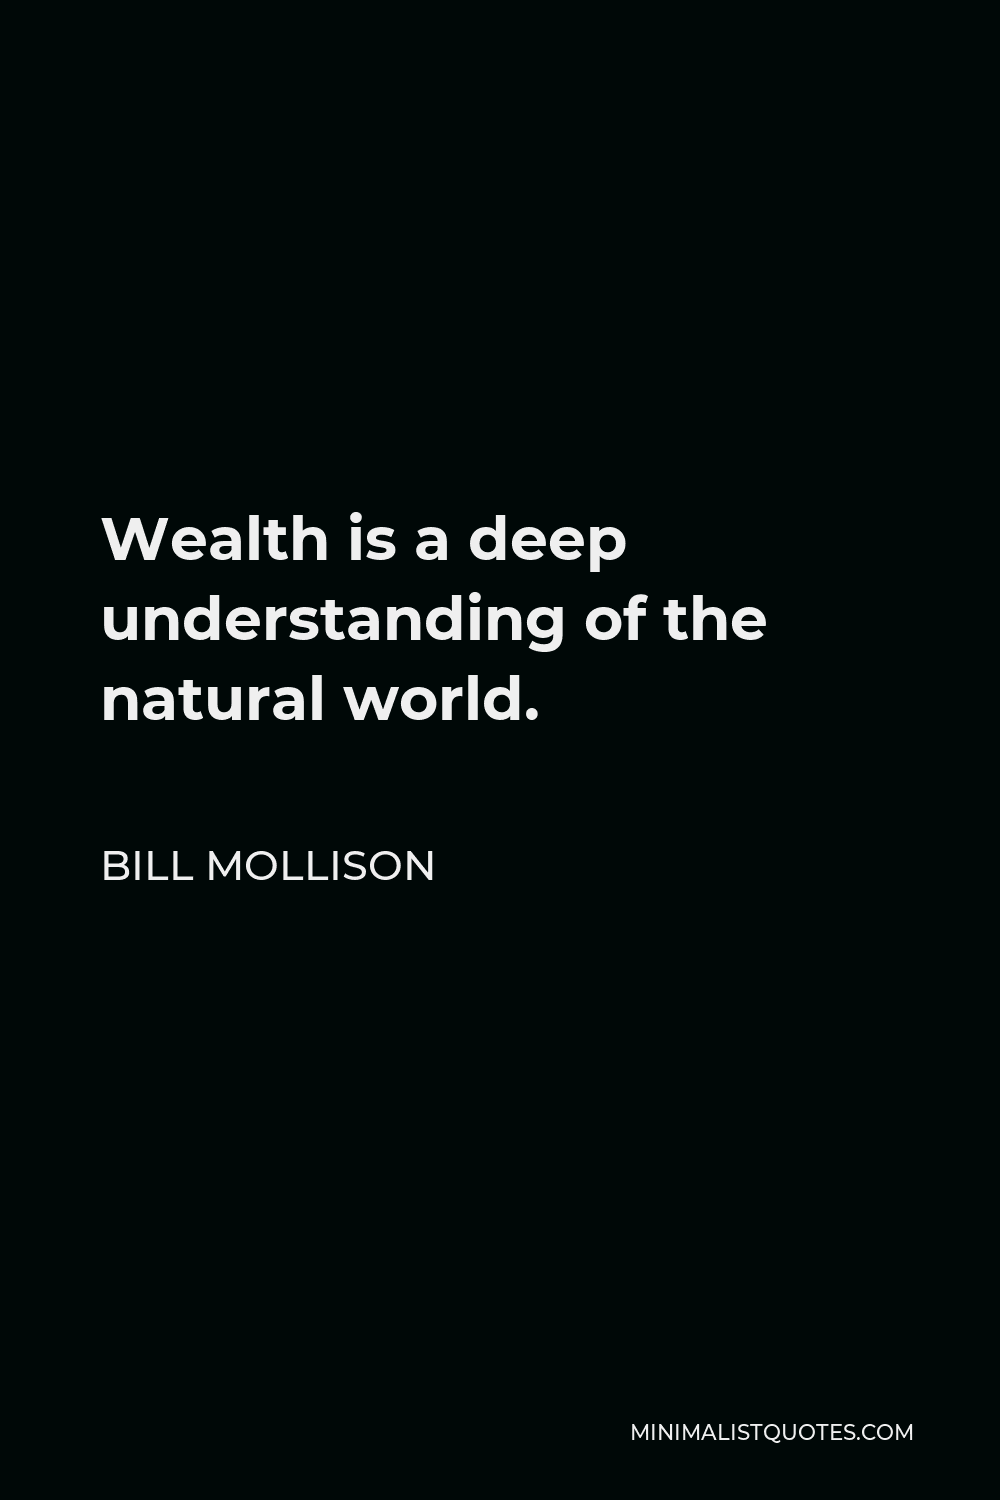 Bill Mollison Quote - Wealth is a deep understanding of the natural world.